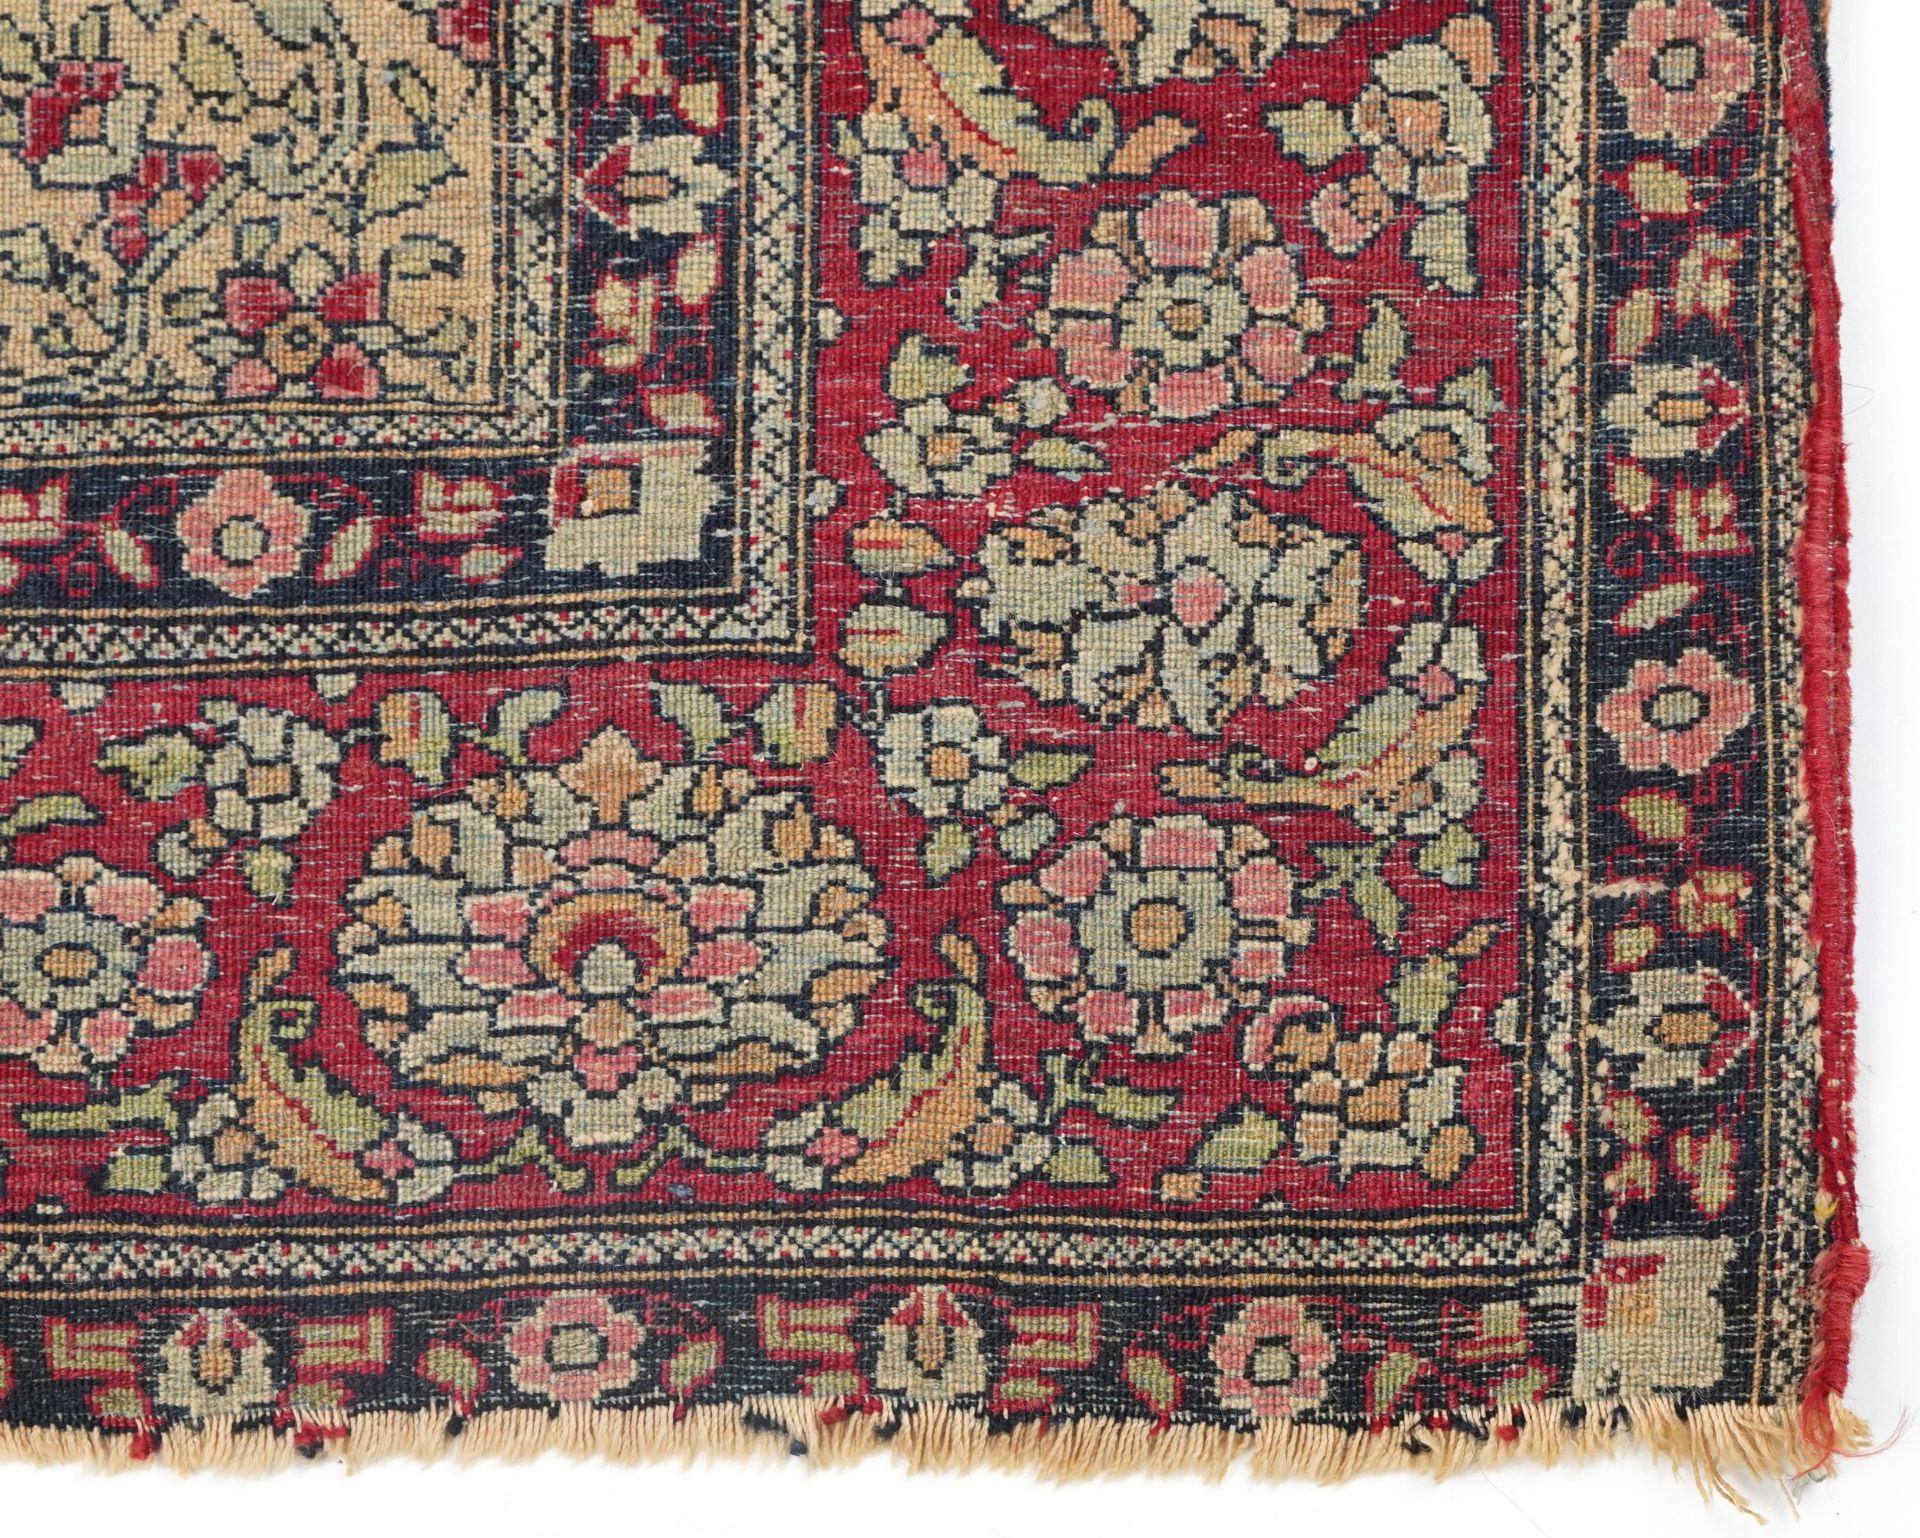 Rectangular Persian red ground rug having and allover repeat floral design, 227cm x 141cm - Image 6 of 6